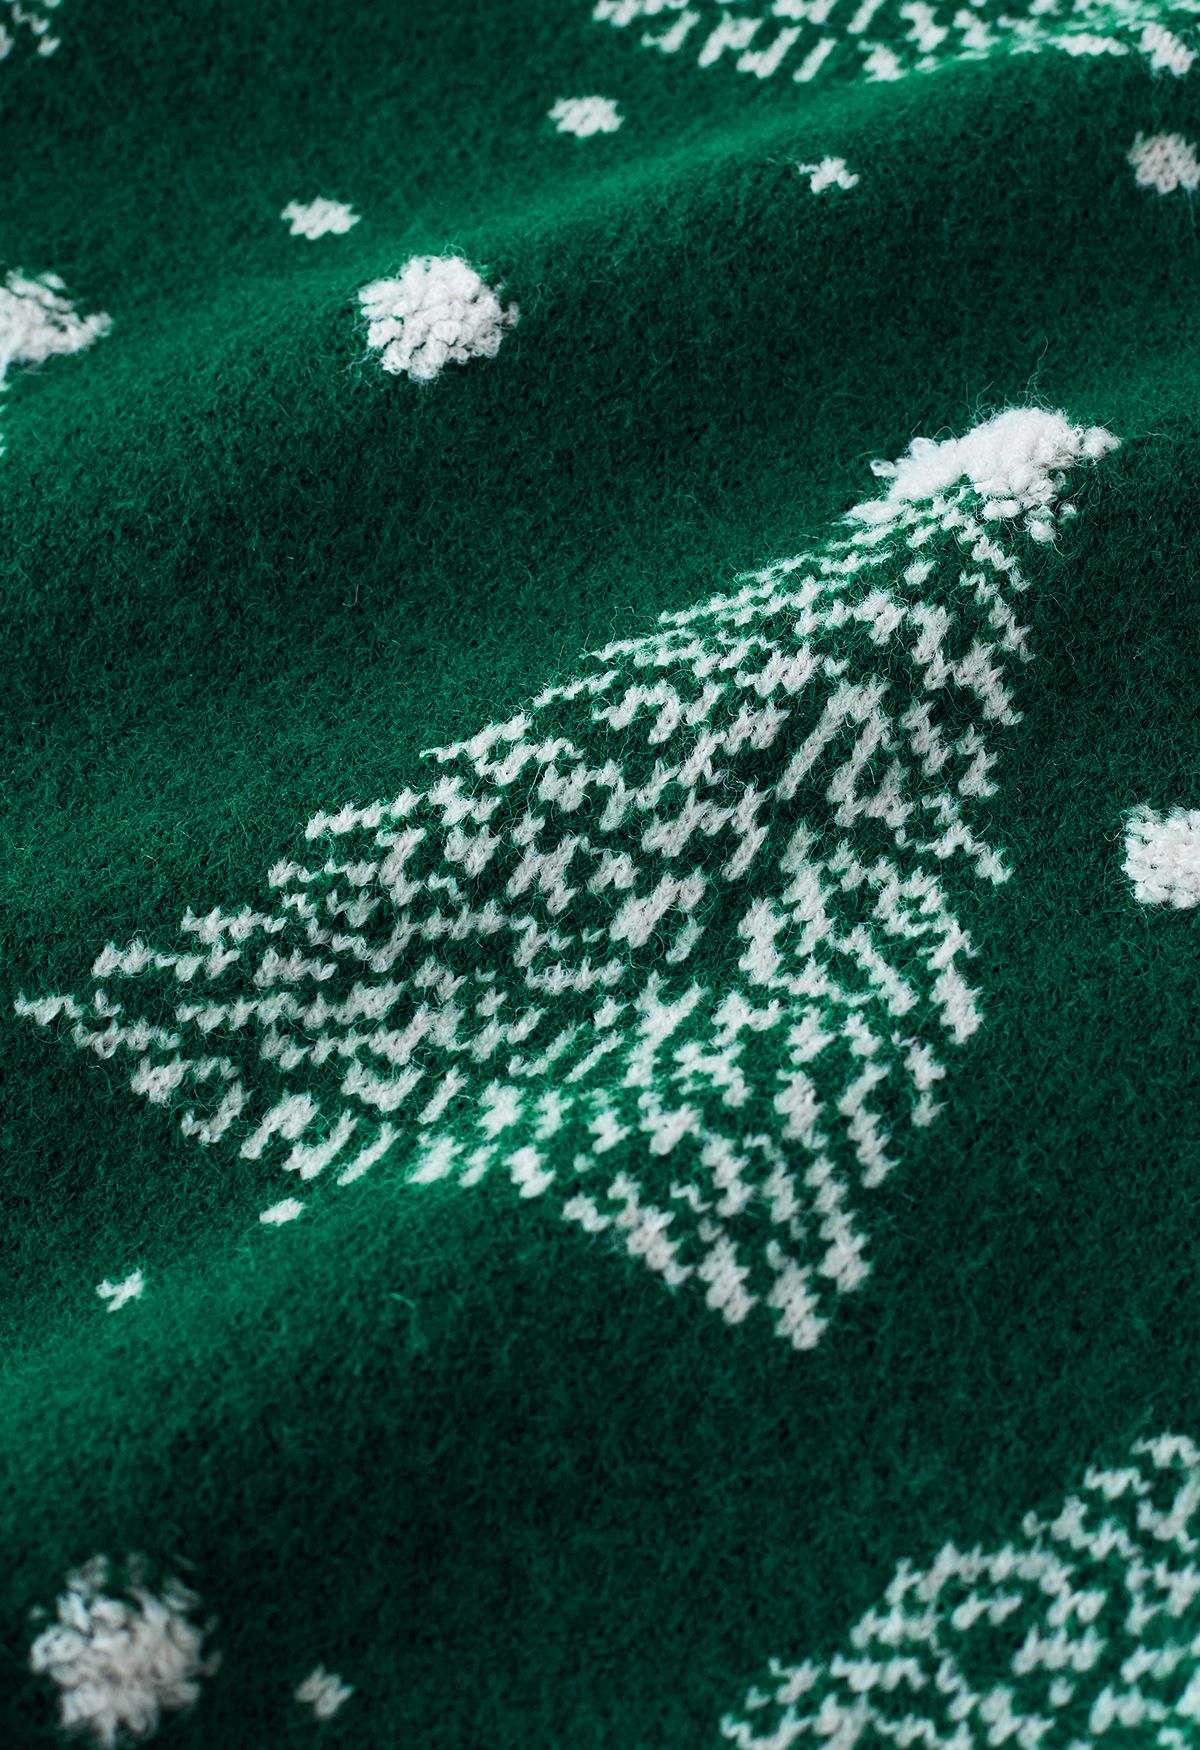 Christmas Tree Pattern Jacquard Knit Sweater in Green